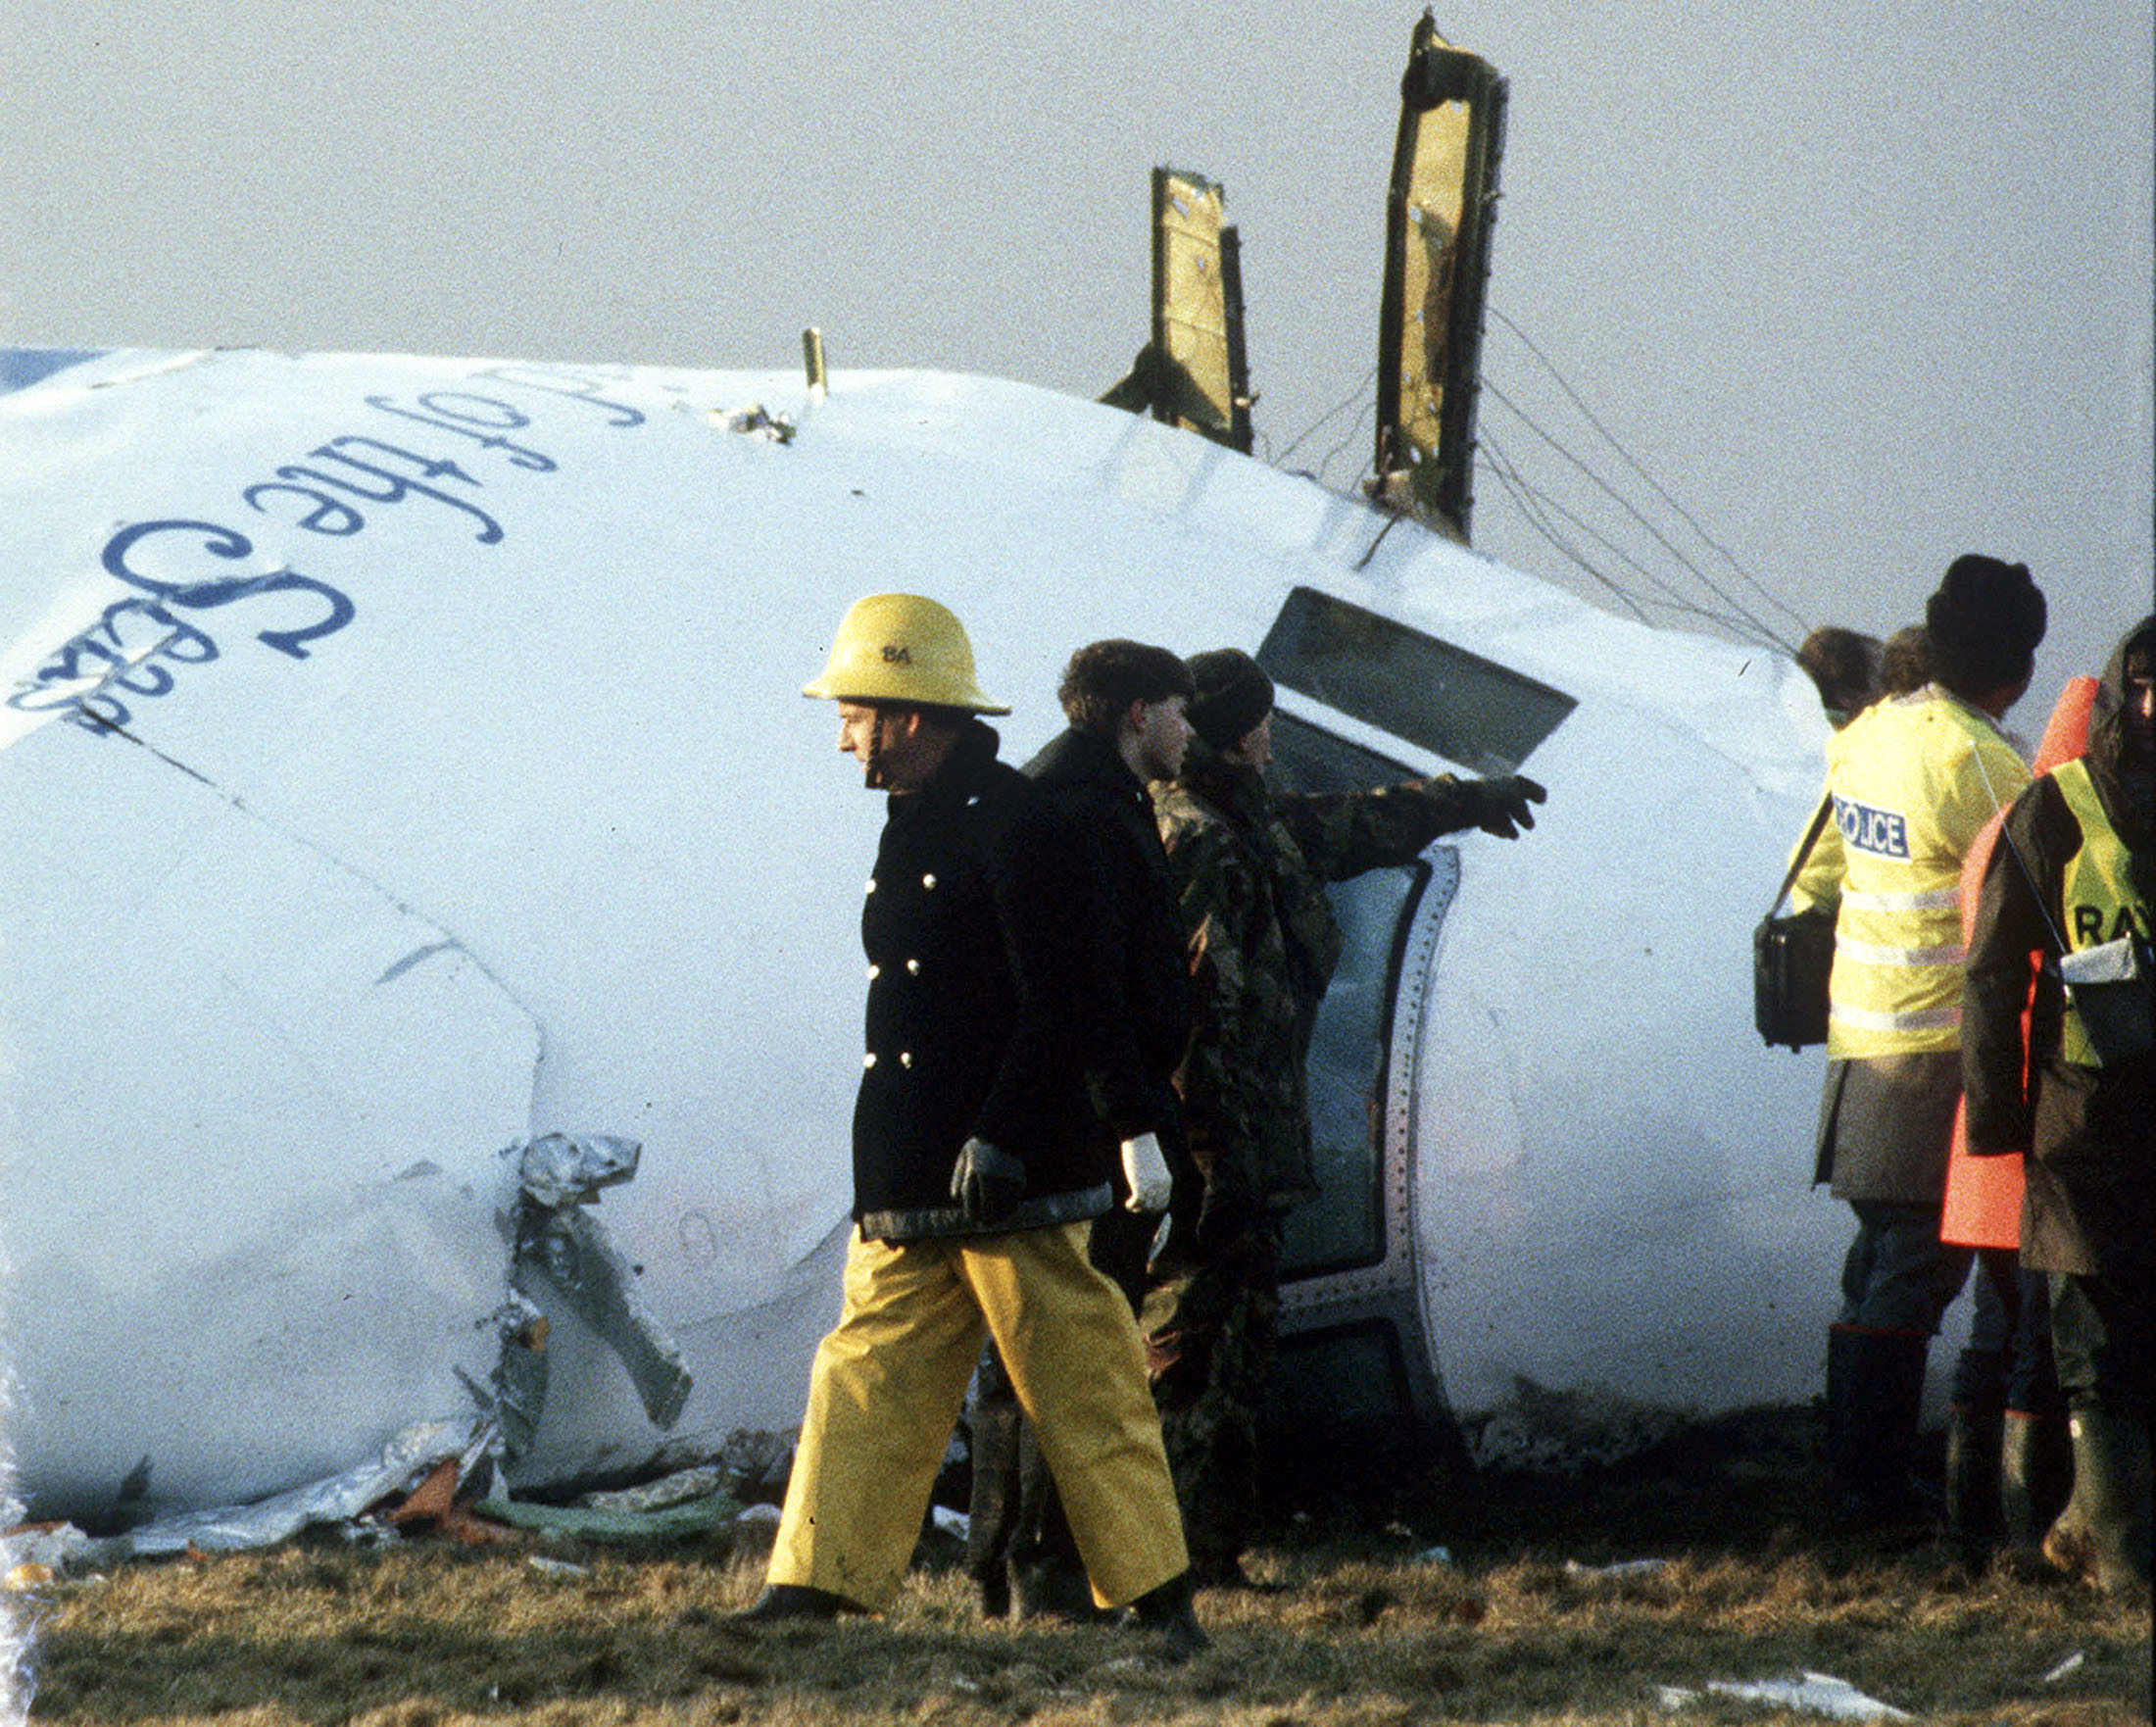 U.S. charges Libyan man in 1988 Pan Am Flight 103 bombing | Reuters